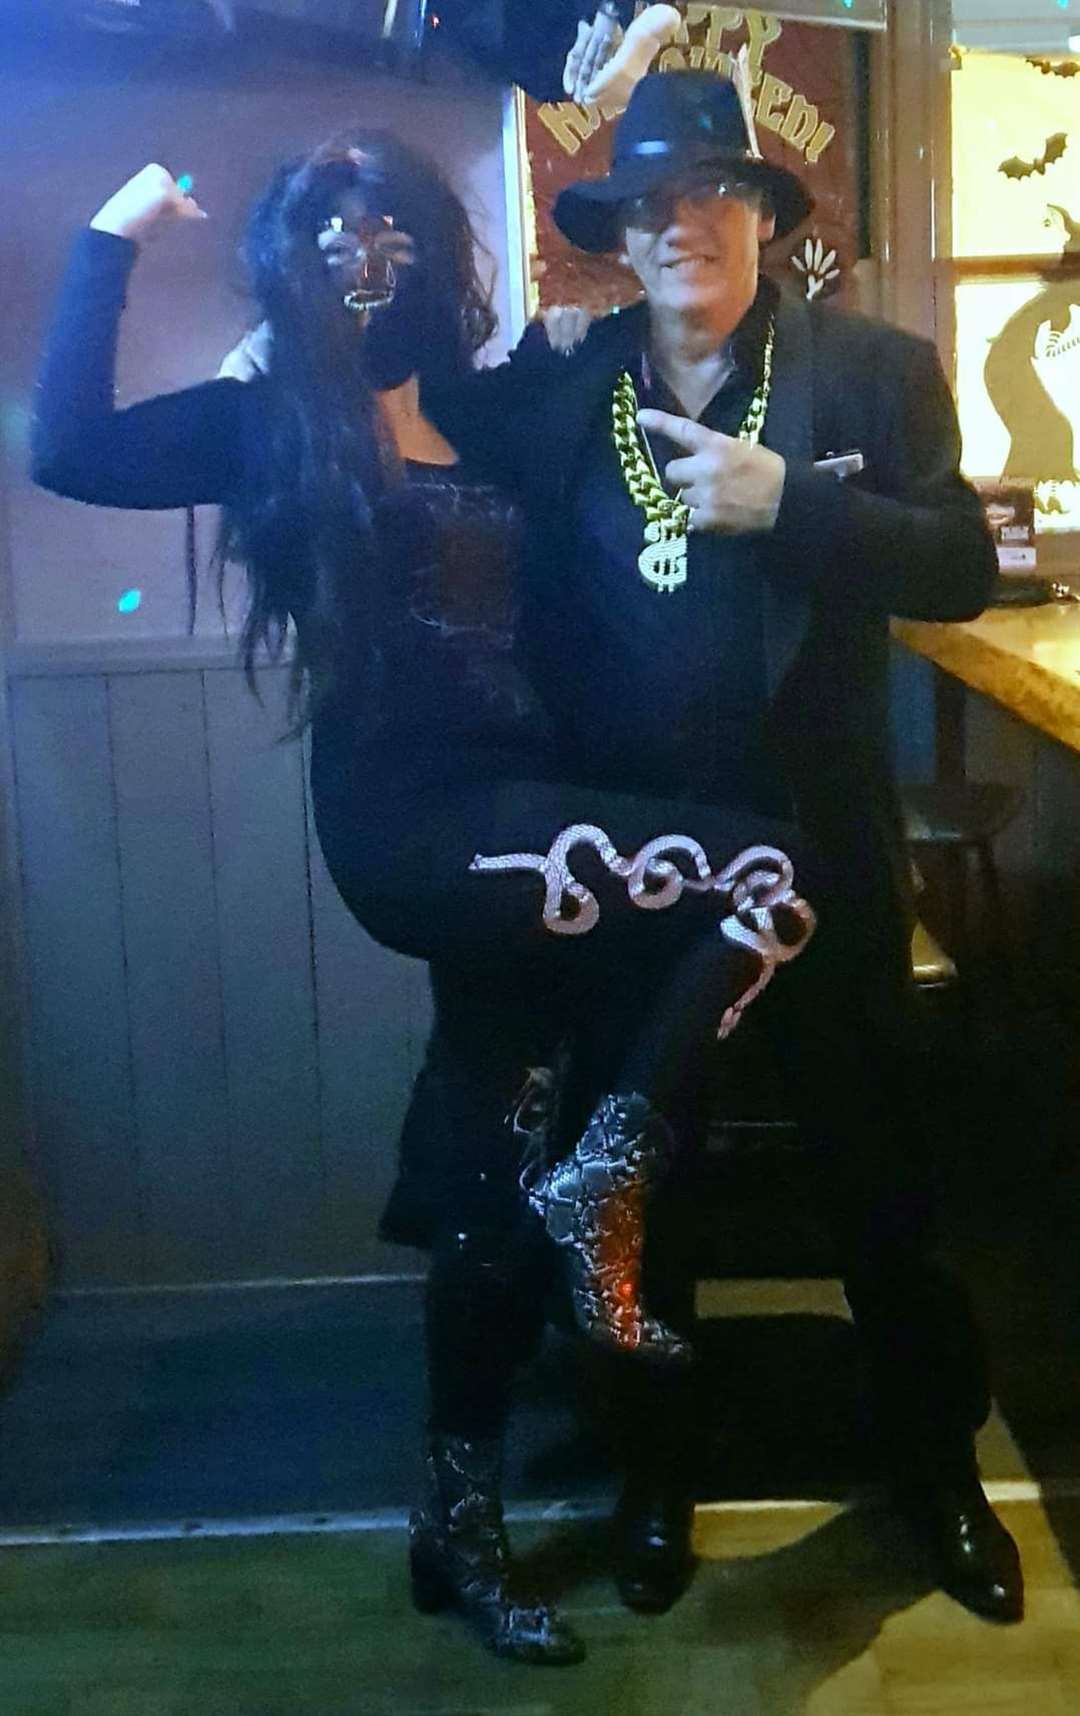 The Havelock House Hotel in Nairn had its own Halloween party.